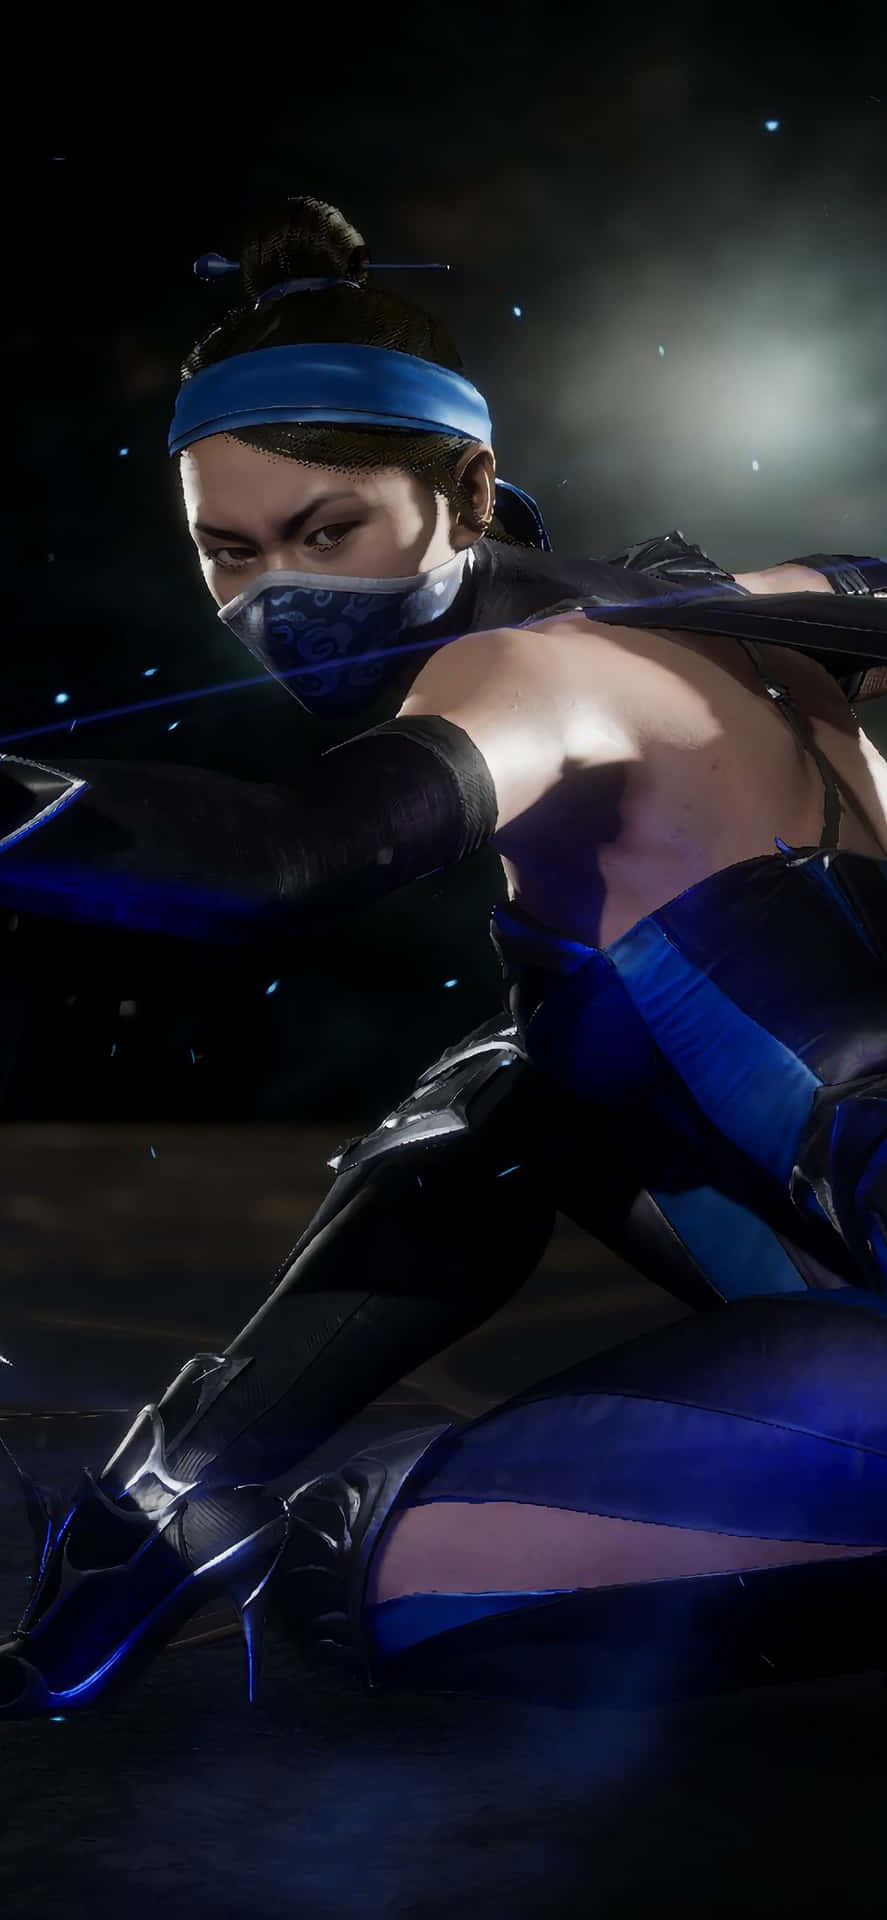 Get Ready for Non-Stop Action with the Mortal Kombat iPhone Wallpaper